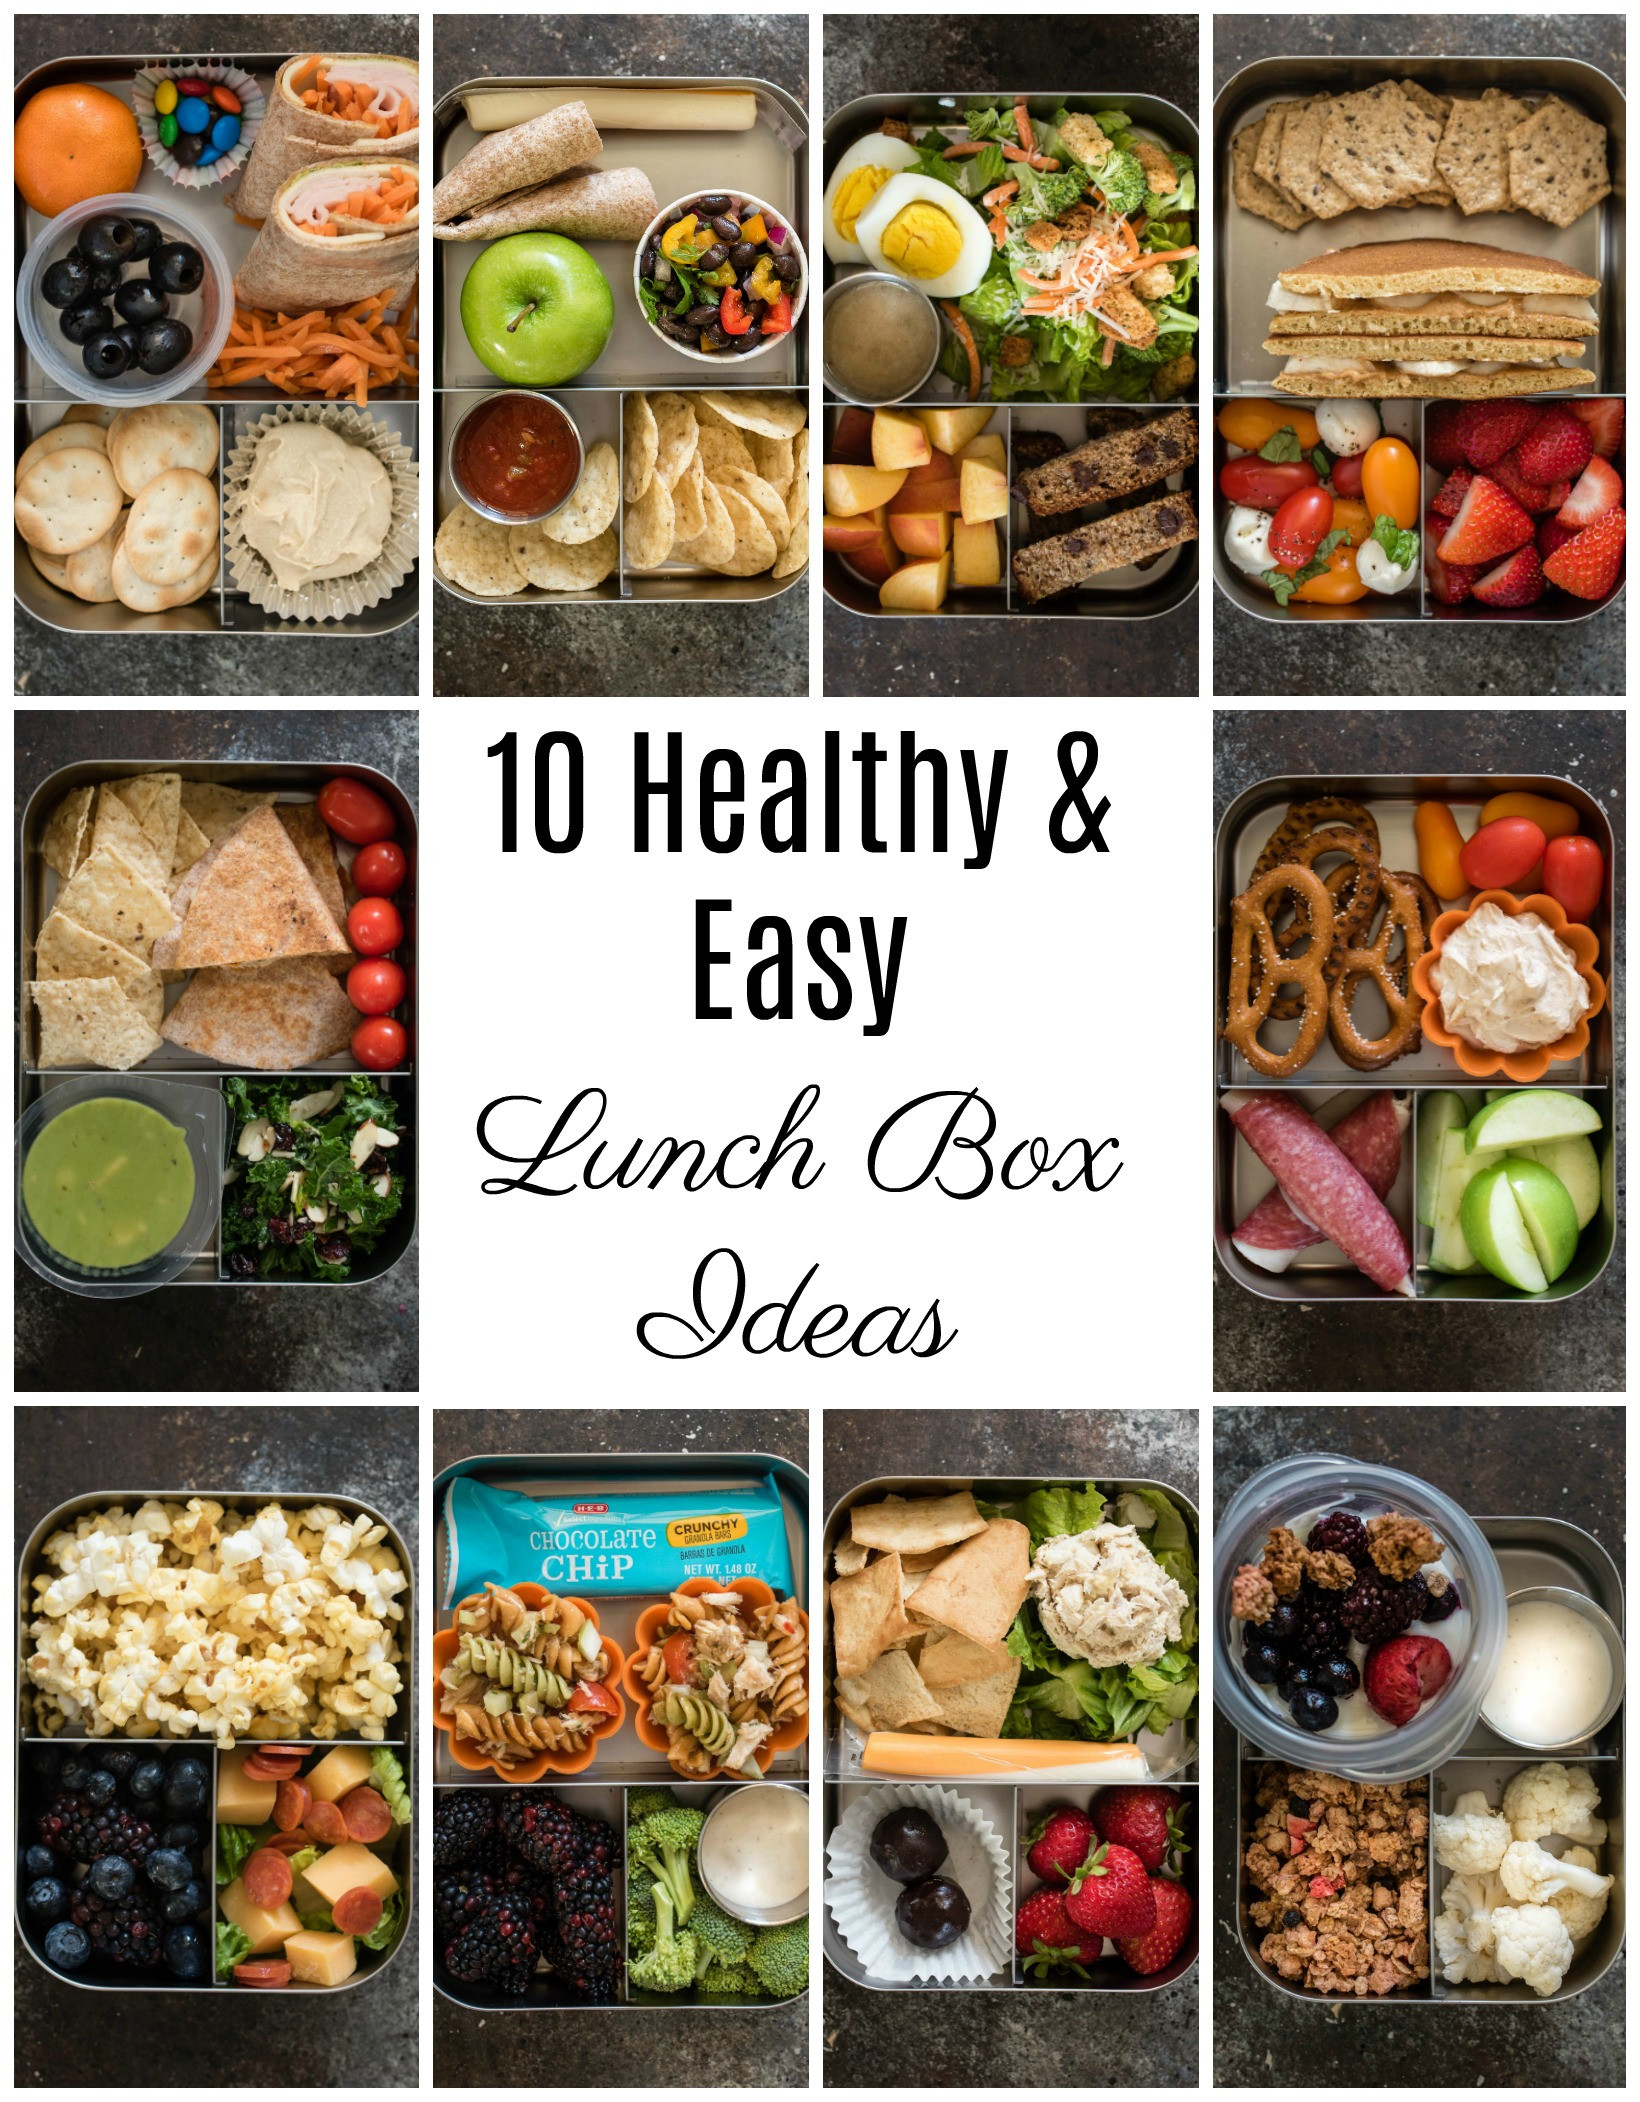 Recipes For Healthy Lunches
 10 Healthy Lunch Box Ideas